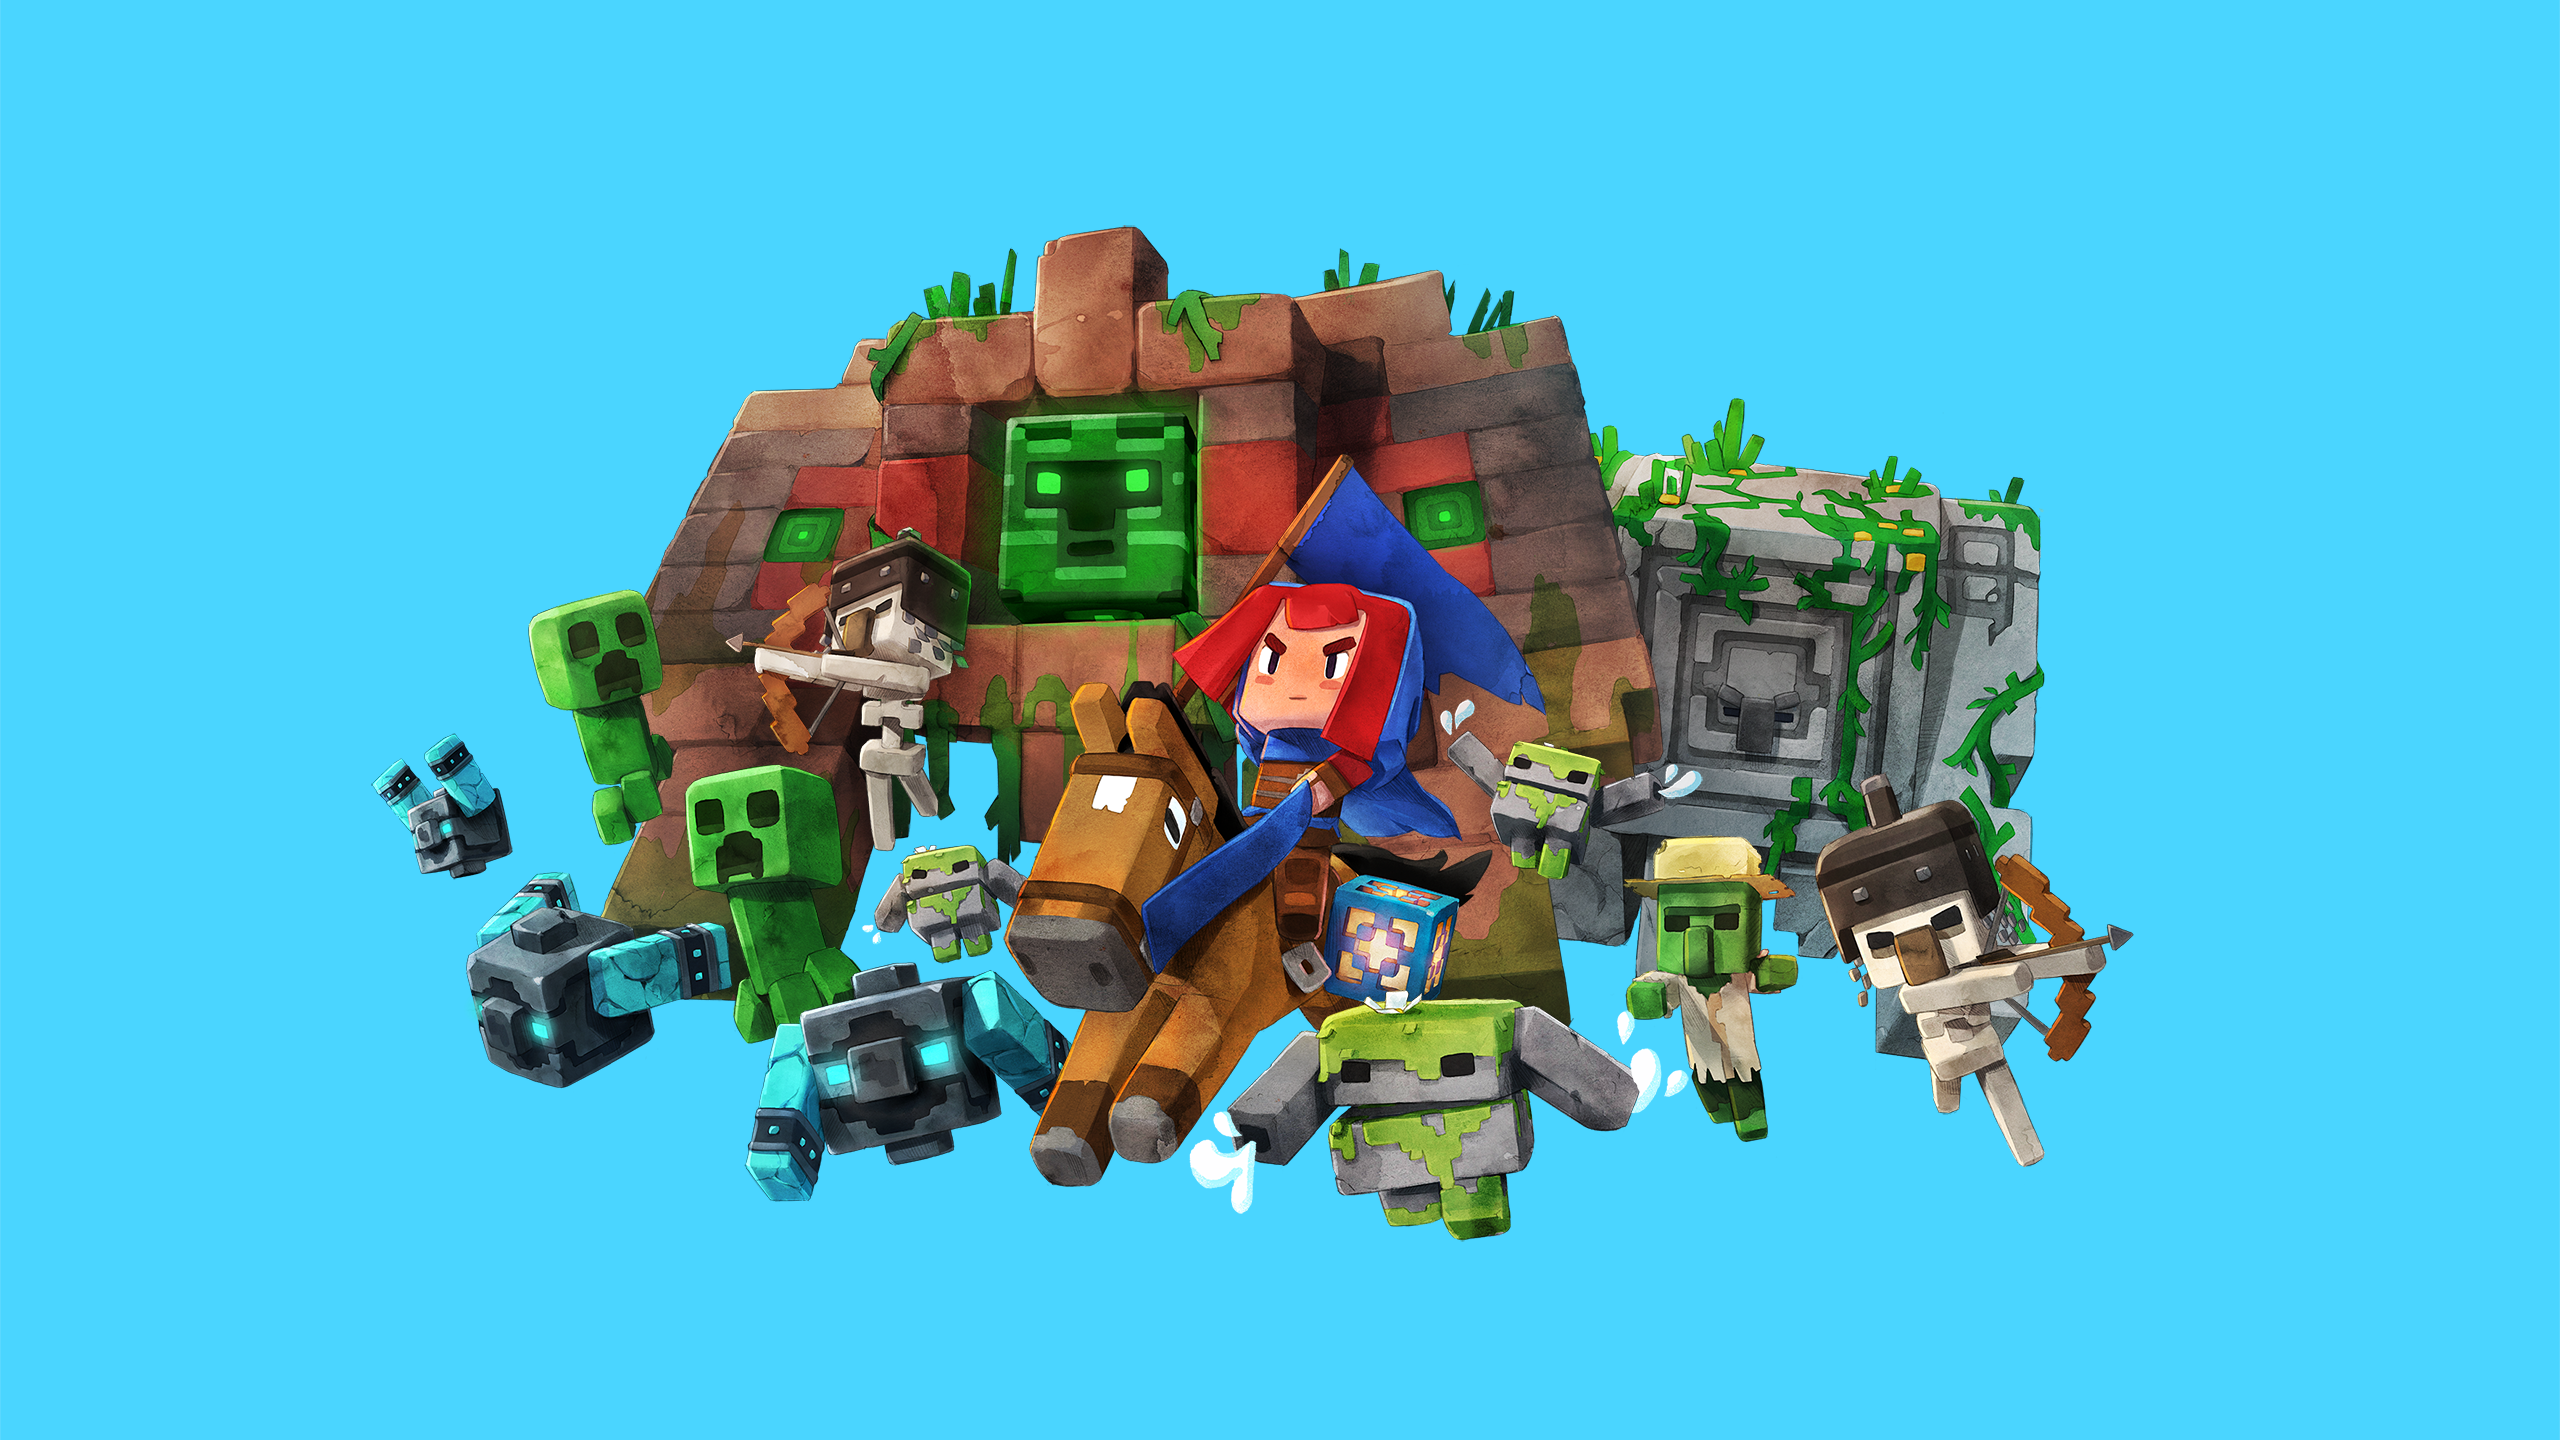 HD desktop wallpaper featuring Minecraft Legends characters and creatures in vibrant colors, perfect for a gaming background.